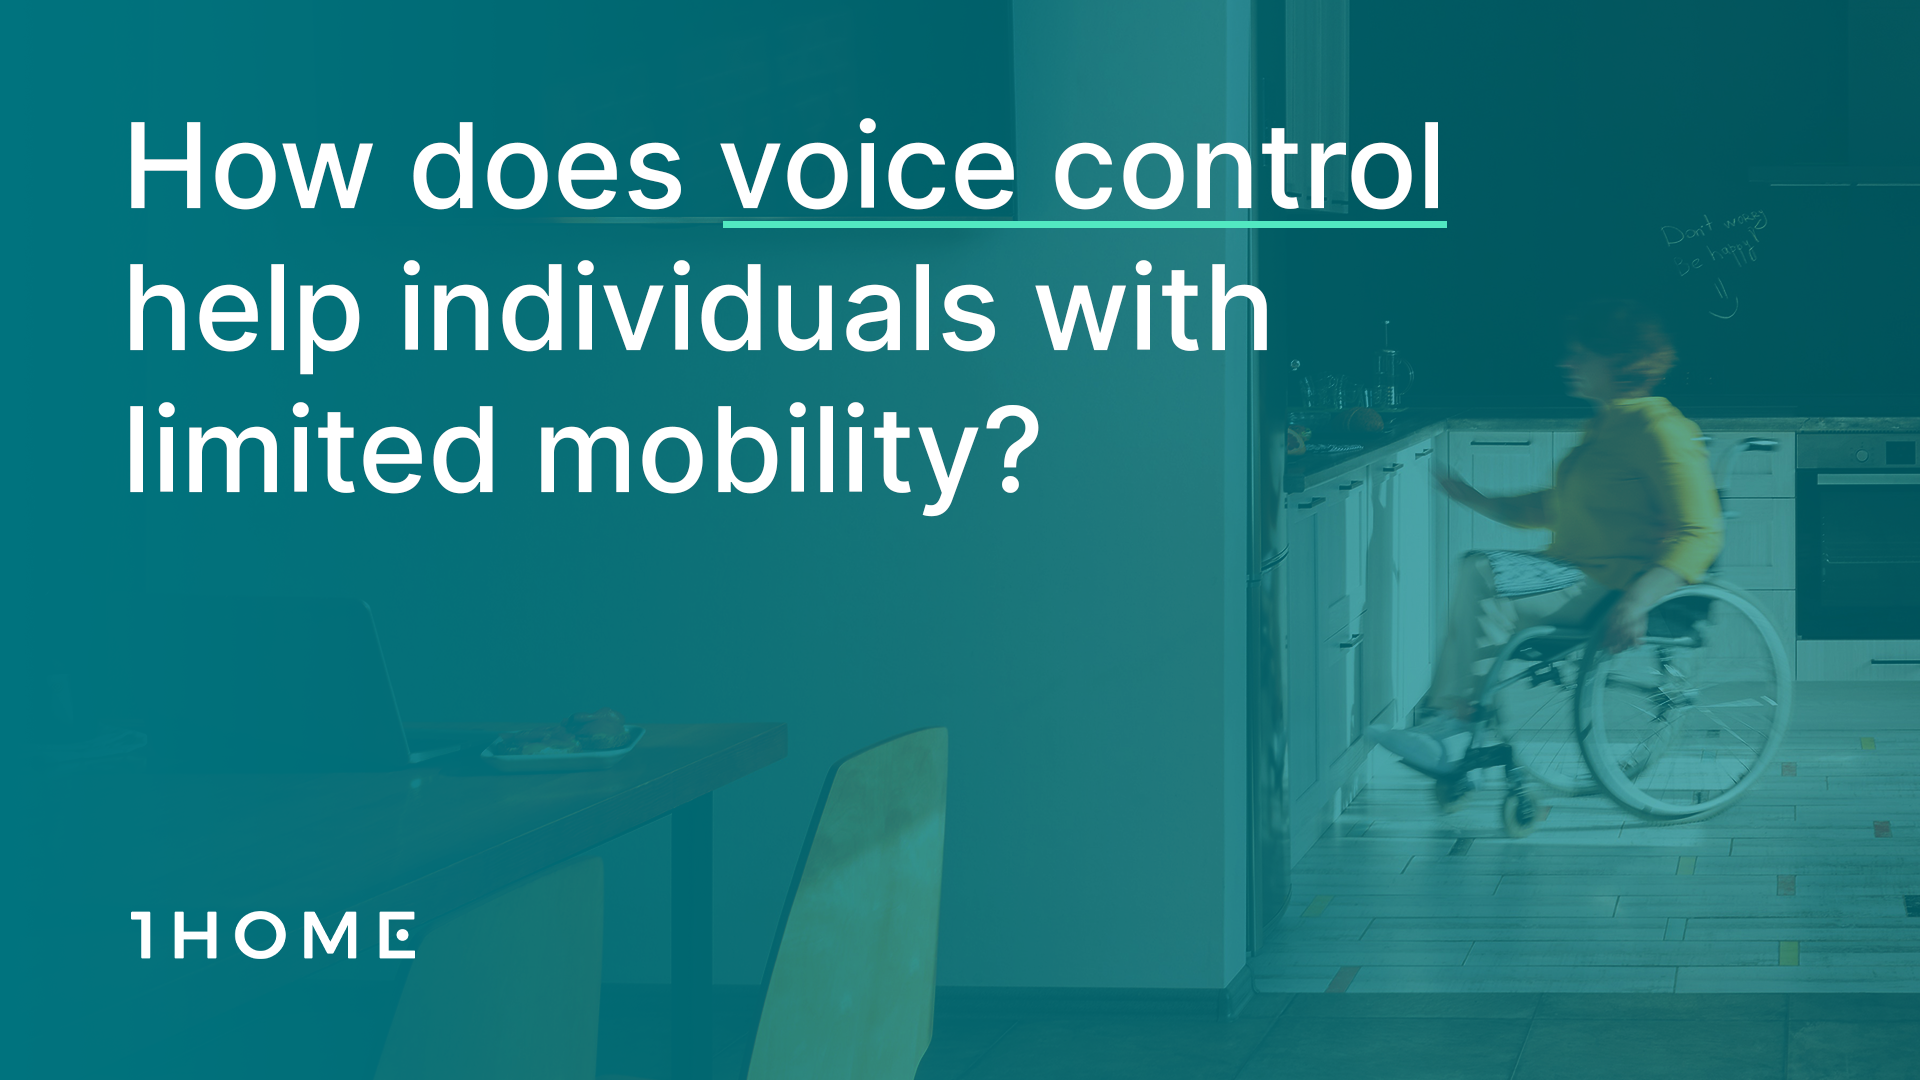 Interview: How does voice control help individuals with limited mobility?